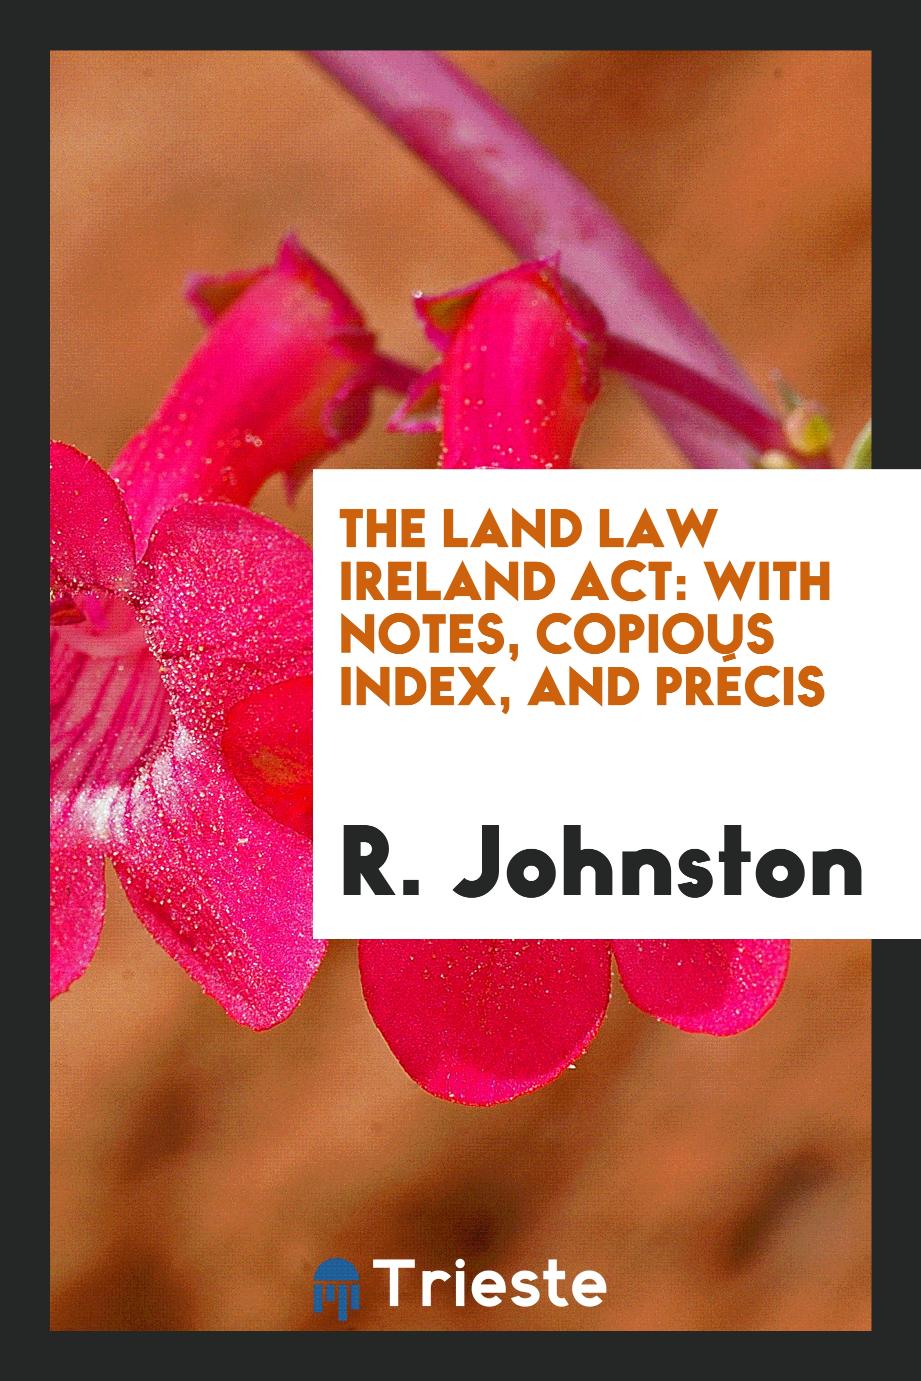 The Land Law Ireland Act: With Notes, Copious Index, and Précis